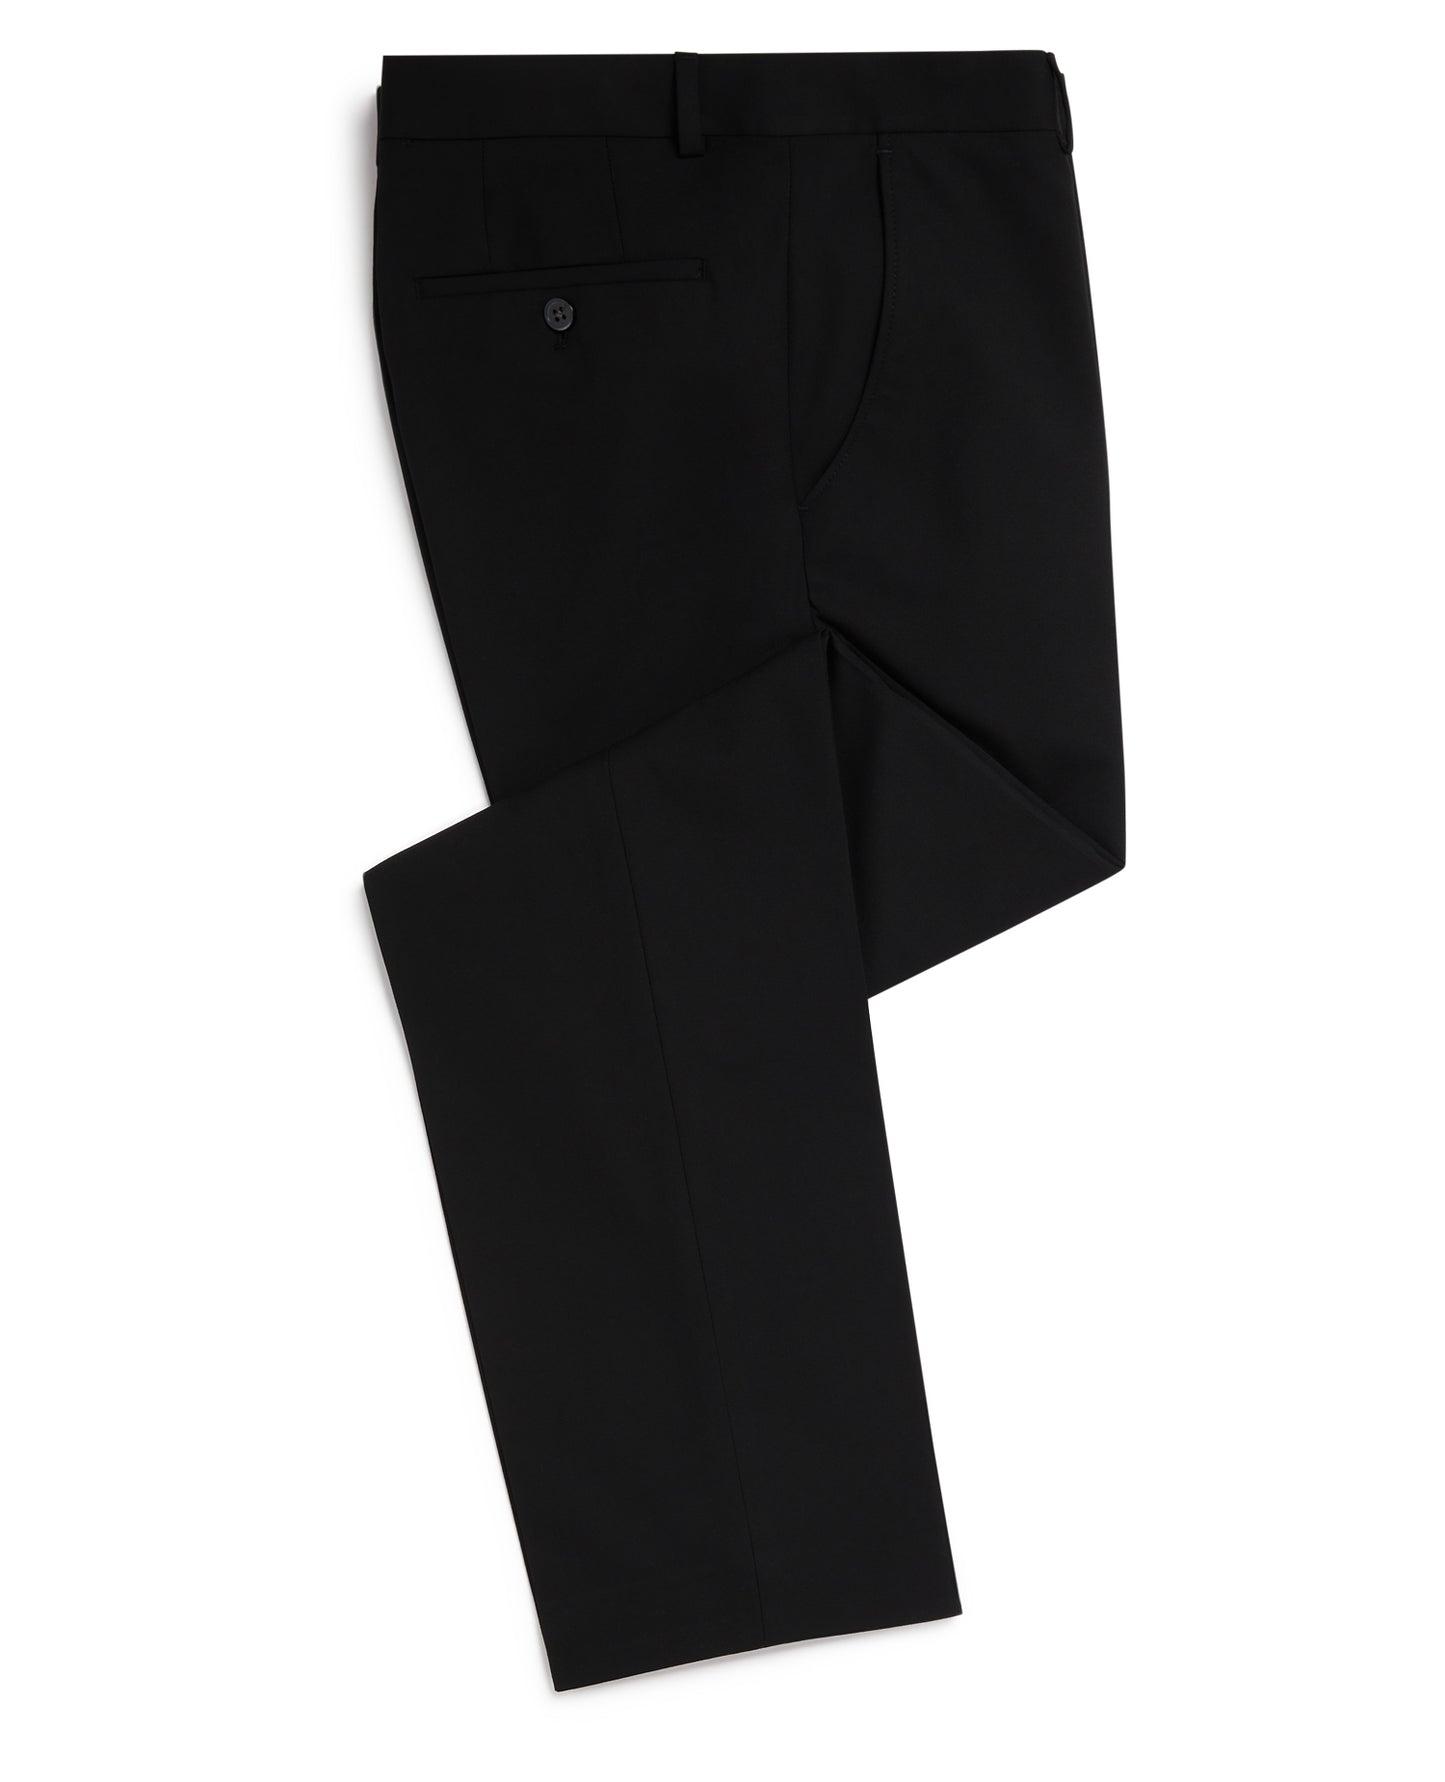 Remus Uomo Palucci Mix and Match Suit Trousers